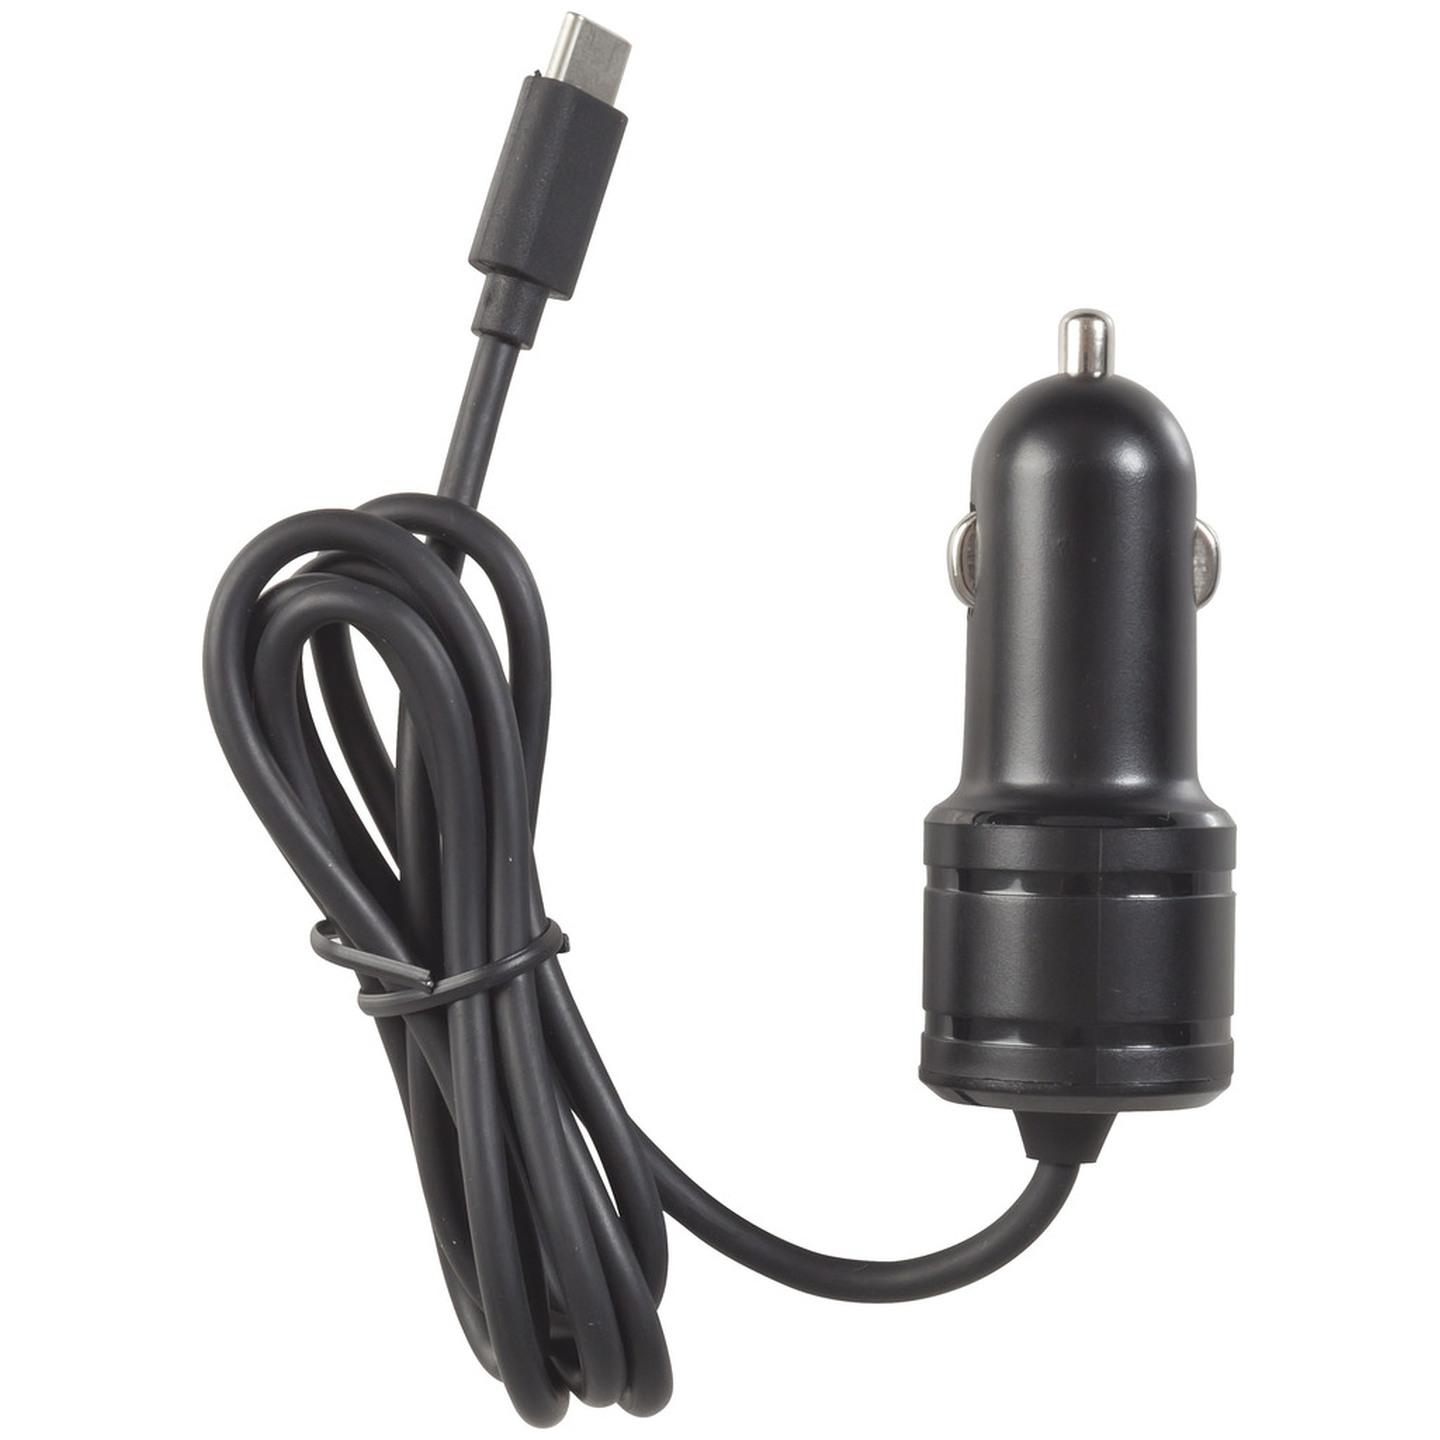 USB Type-C Car Charger - 5.4A Total Output